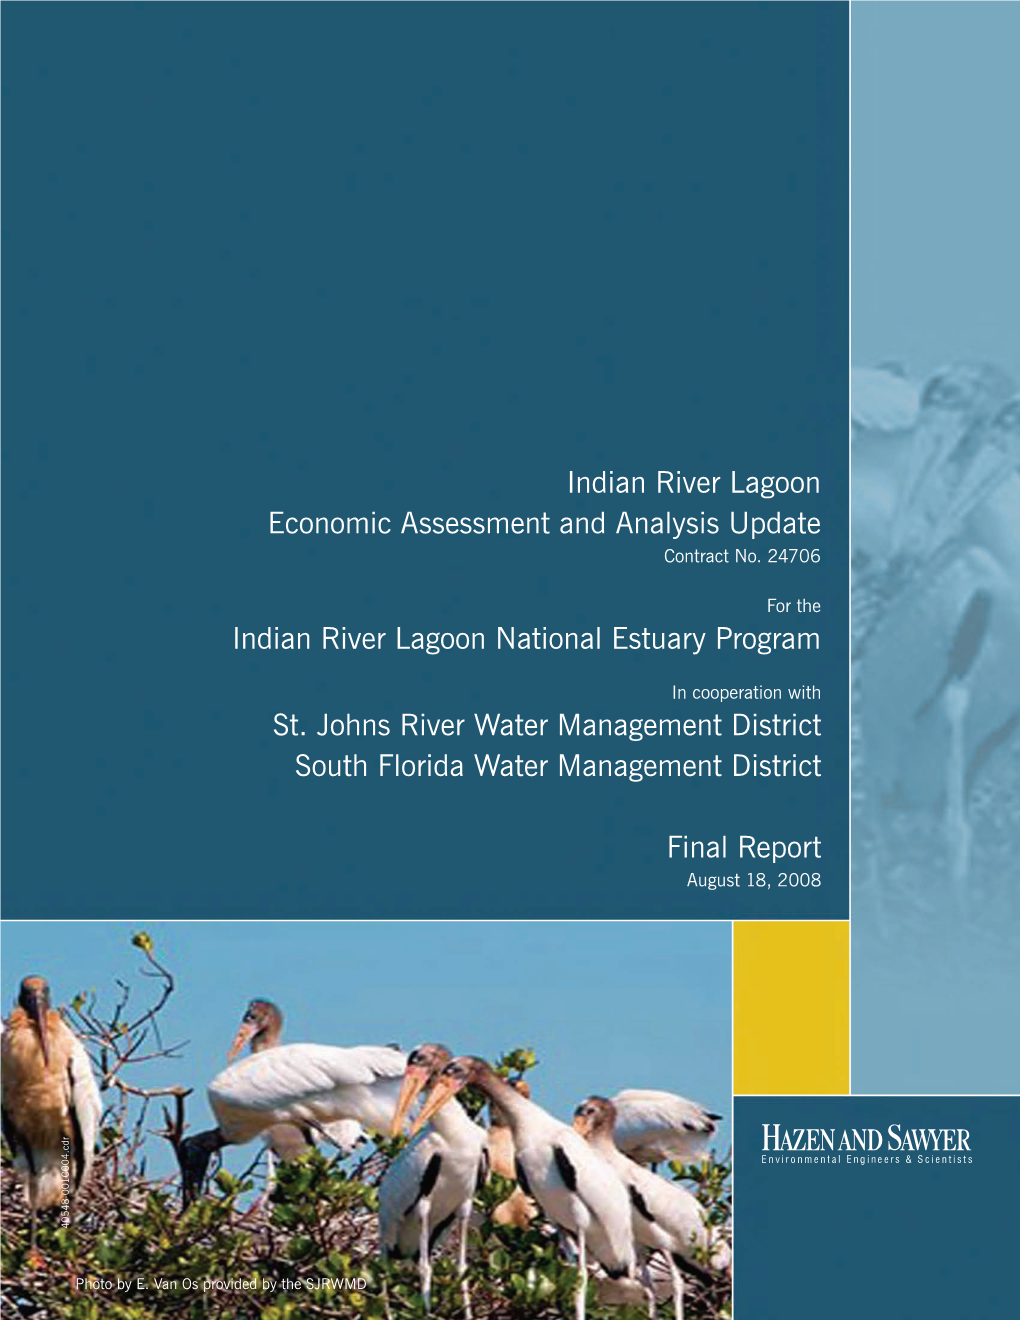 Indian River Lagoon Economic Assessment and Analysis Update Contract No